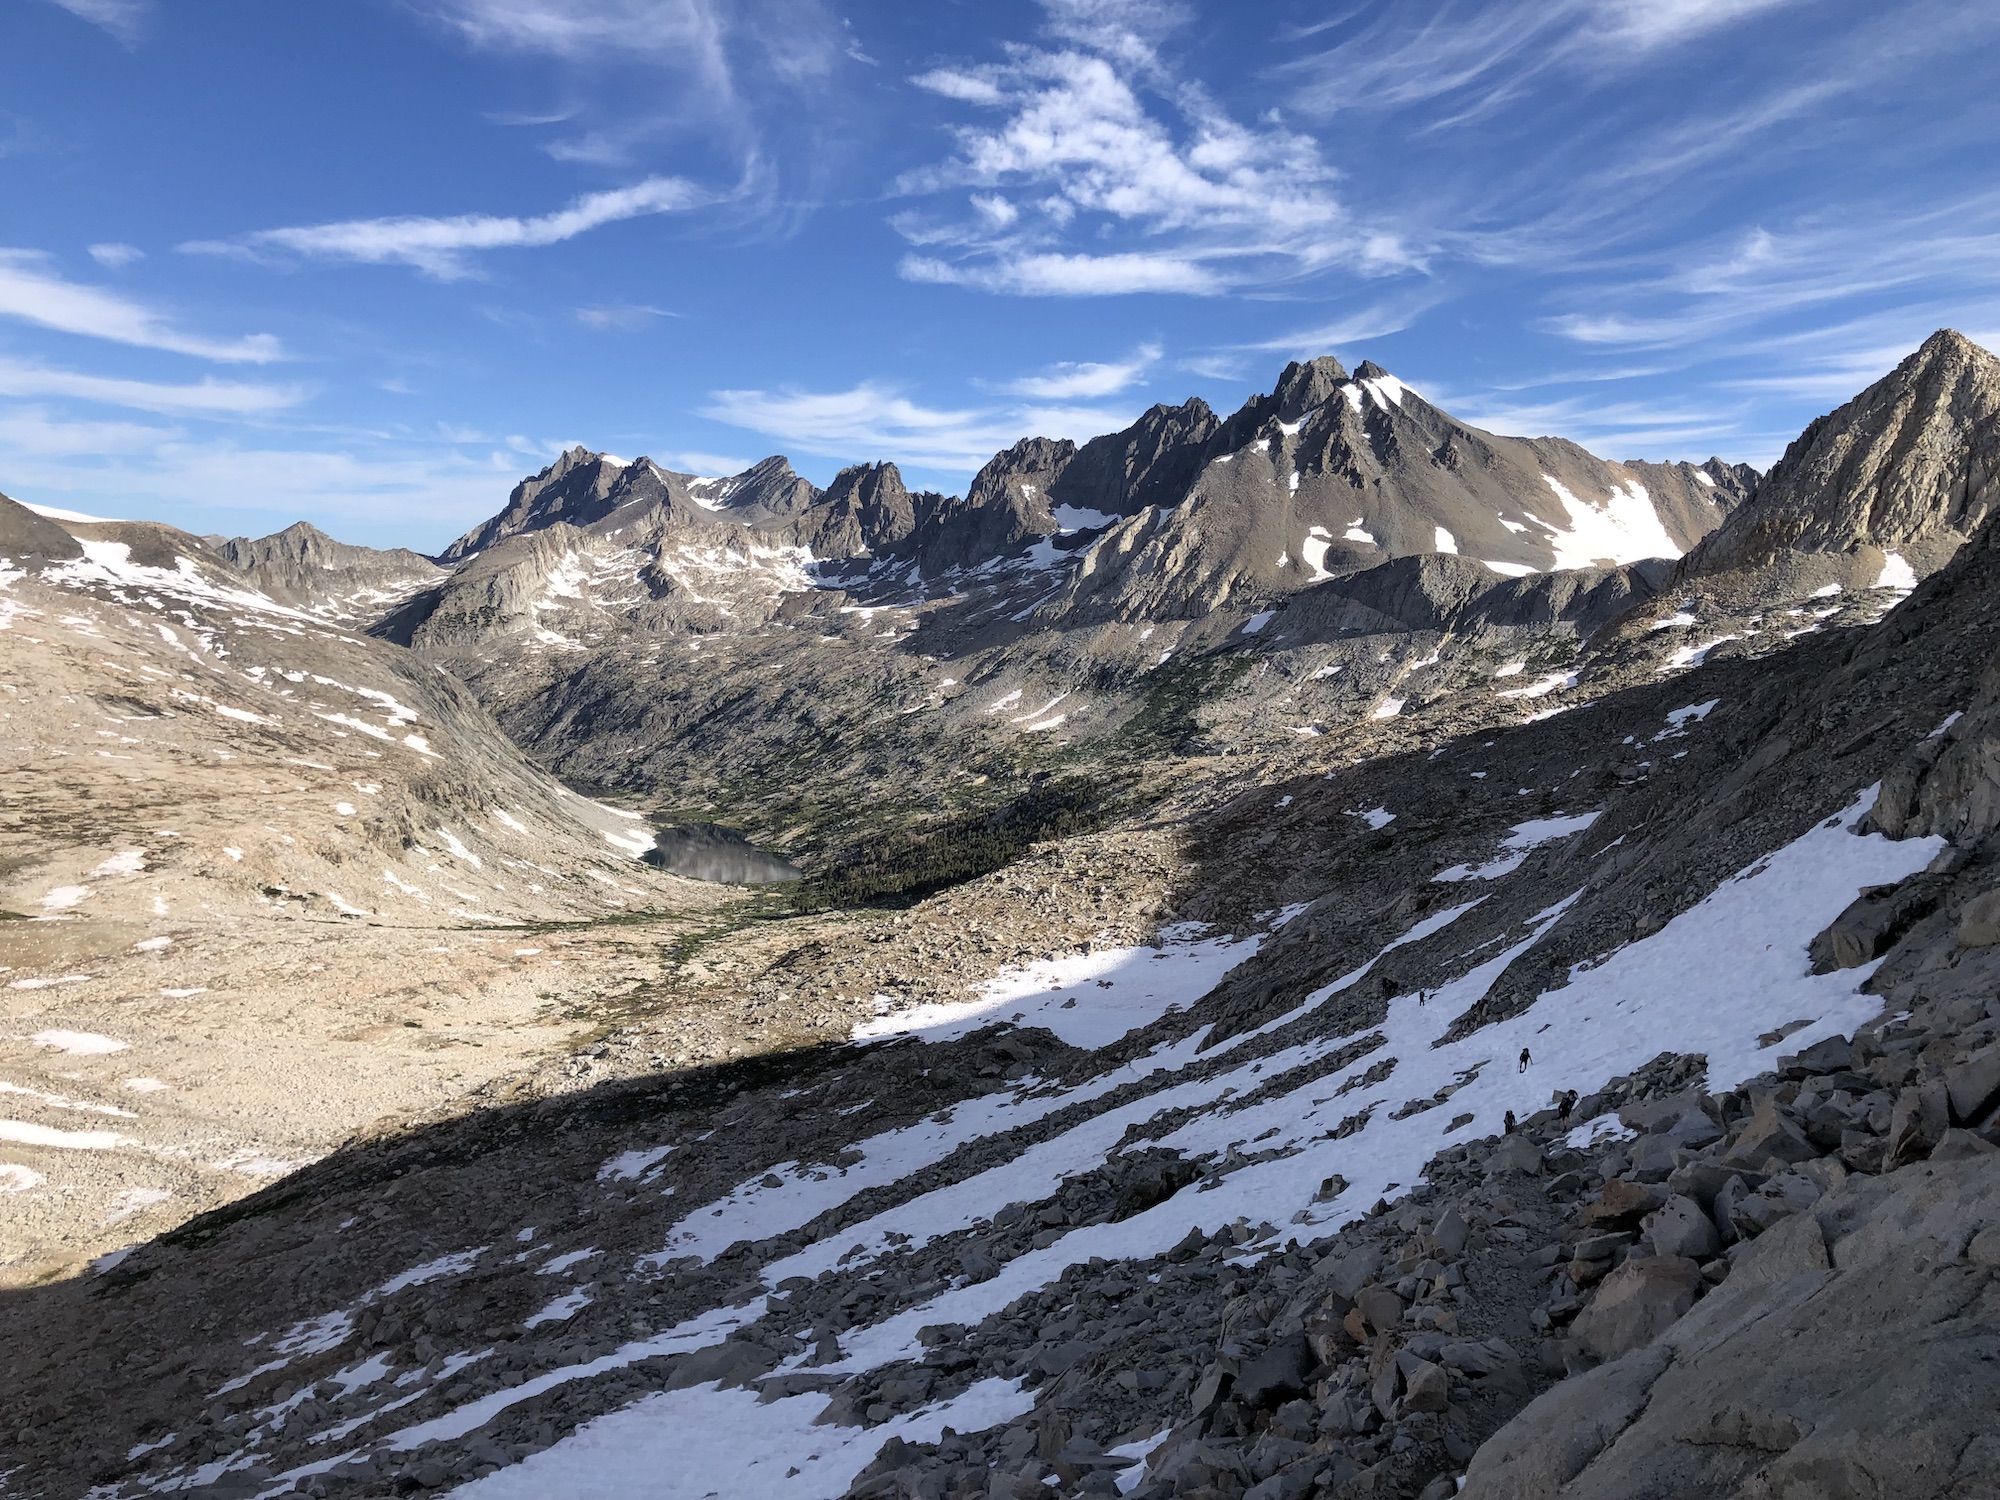 A view of Palisade Lakes from the top of the pass.